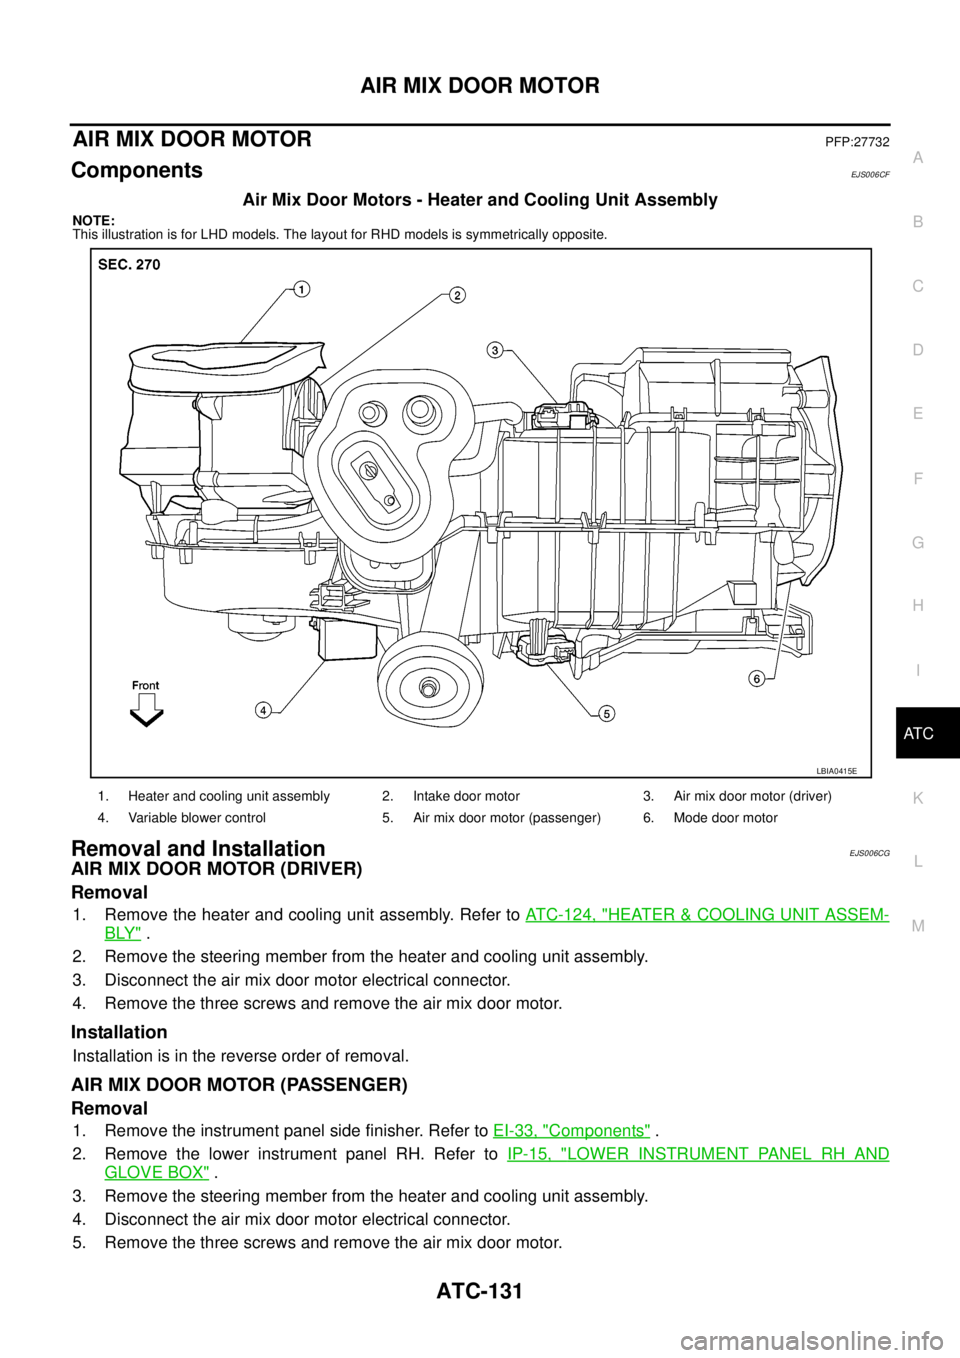 NISSAN NAVARA 2005  Repair Workshop Manual AIR MIX DOOR MOTOR
ATC-131
C
D
E
F
G
H
I
K
L
MA
B
AT C
AIR MIX DOOR MOTORPFP:27732
ComponentsEJS006CF
Air Mix Door Motors - Heater and Cooling Unit Assembly
NOTE:
This illustration is for LHD models. 